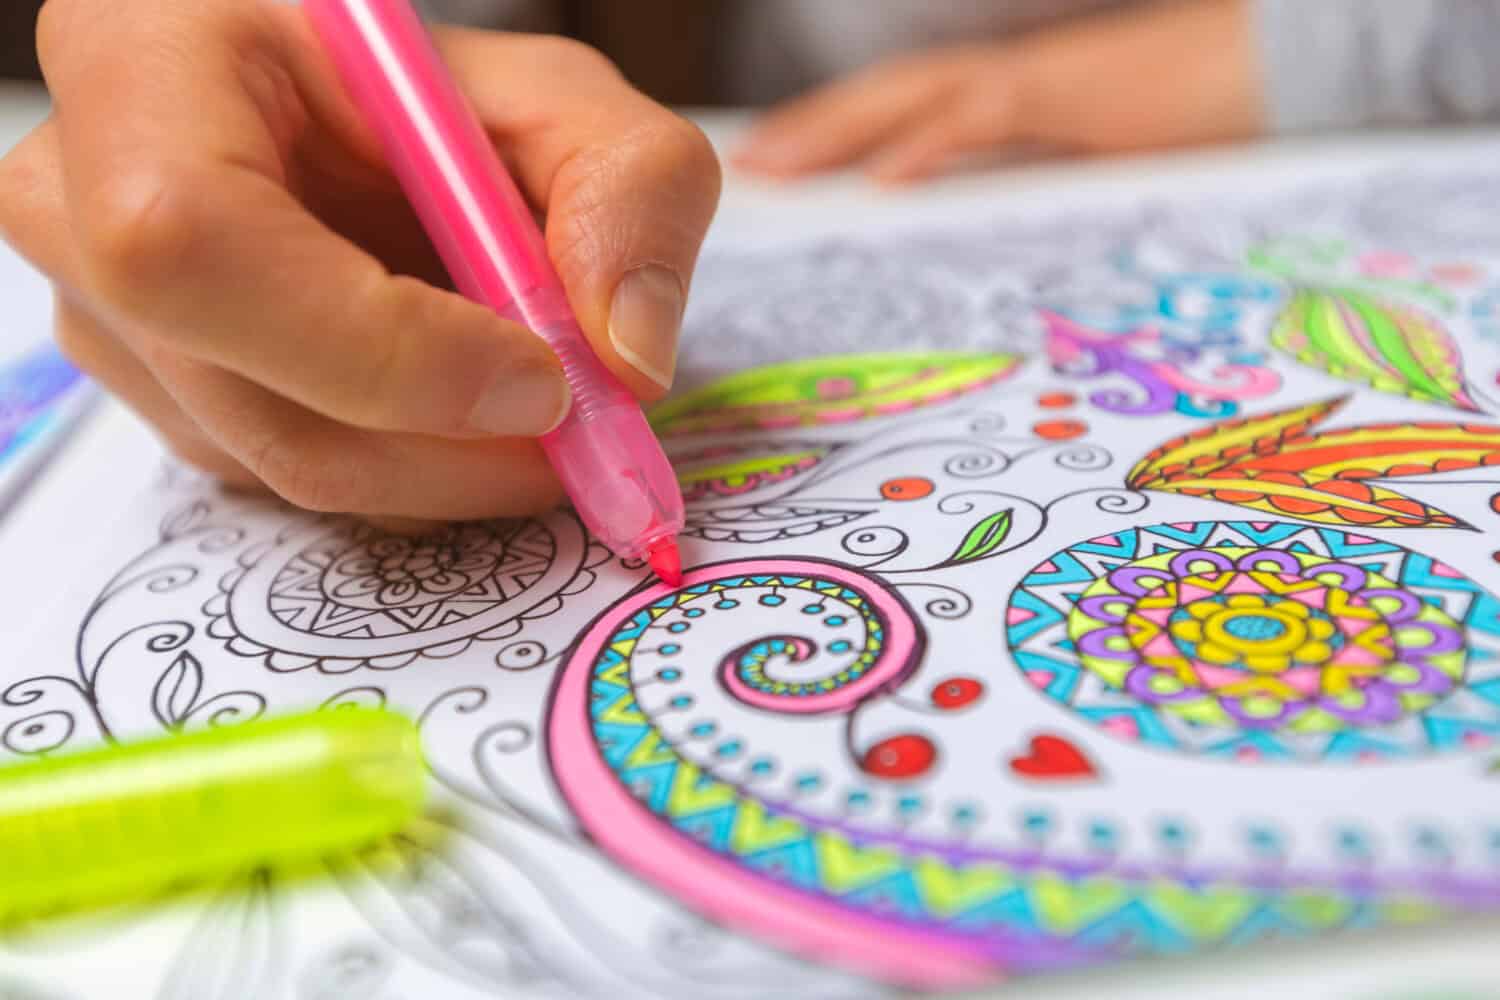 Coloring book for adults. Drawing as a hobby. Concentration activities to relieve stress.